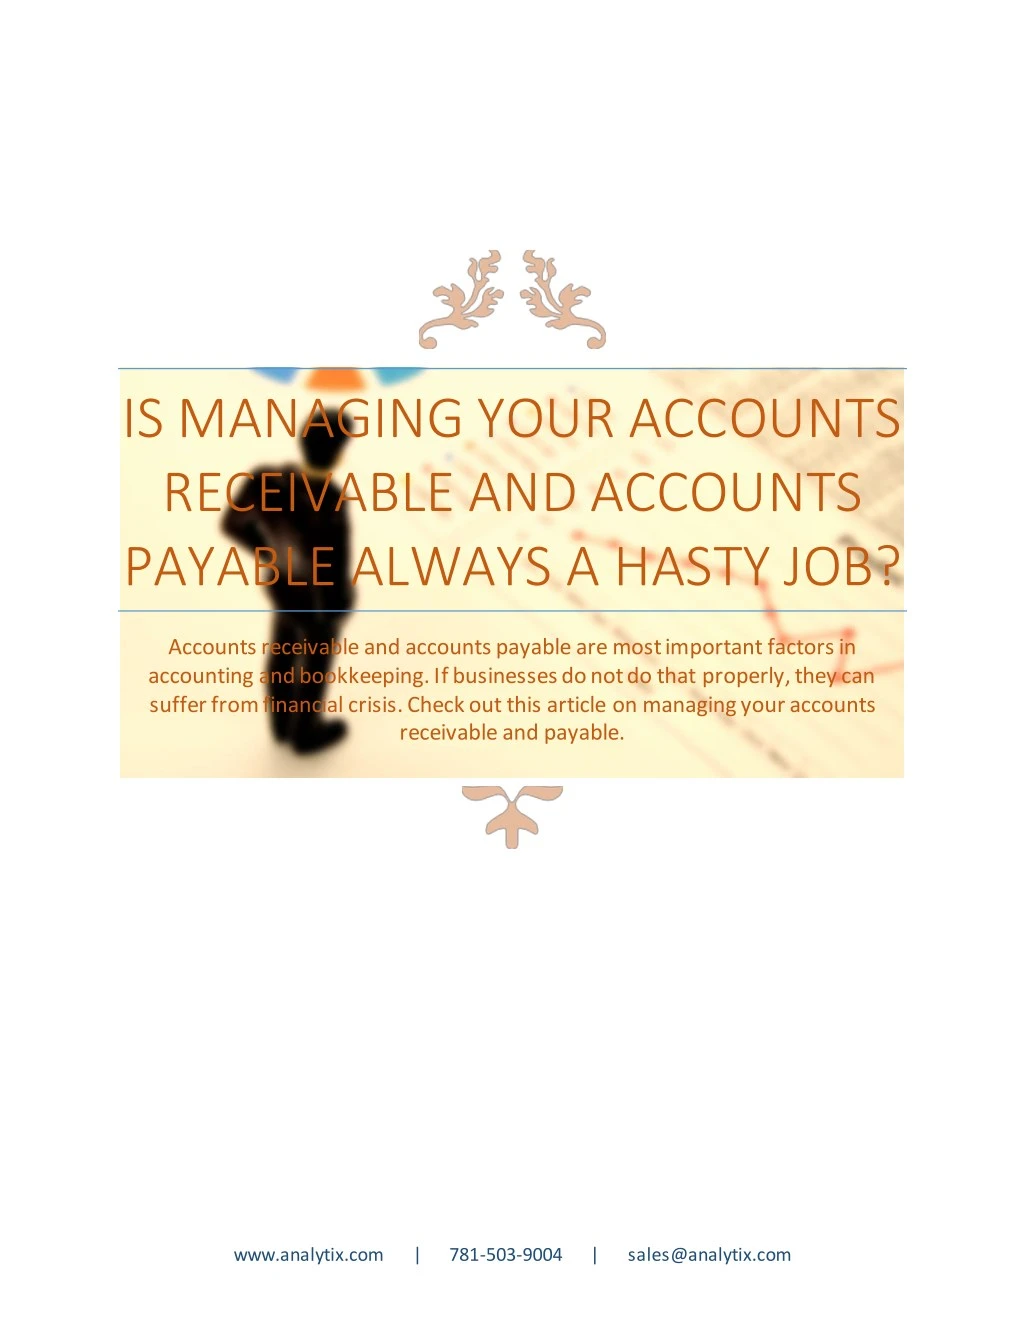 is managing your accounts receivable and accounts